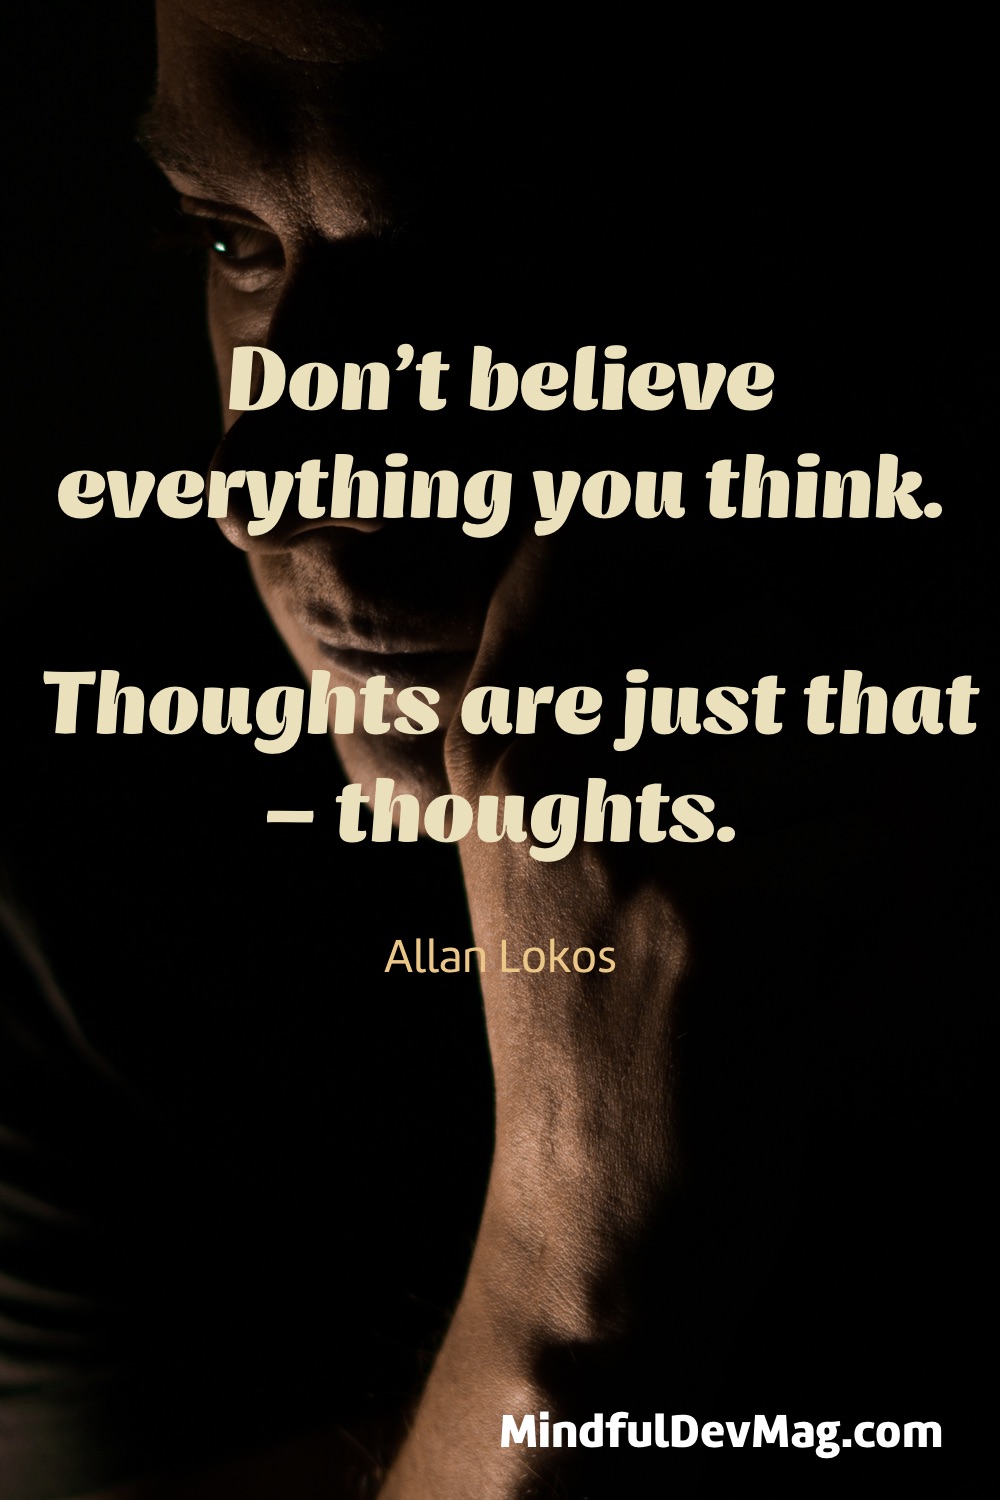 Mindful quote: Don’t believe everything you think. Thoughts are just that – thoughts. - Allan Lokos